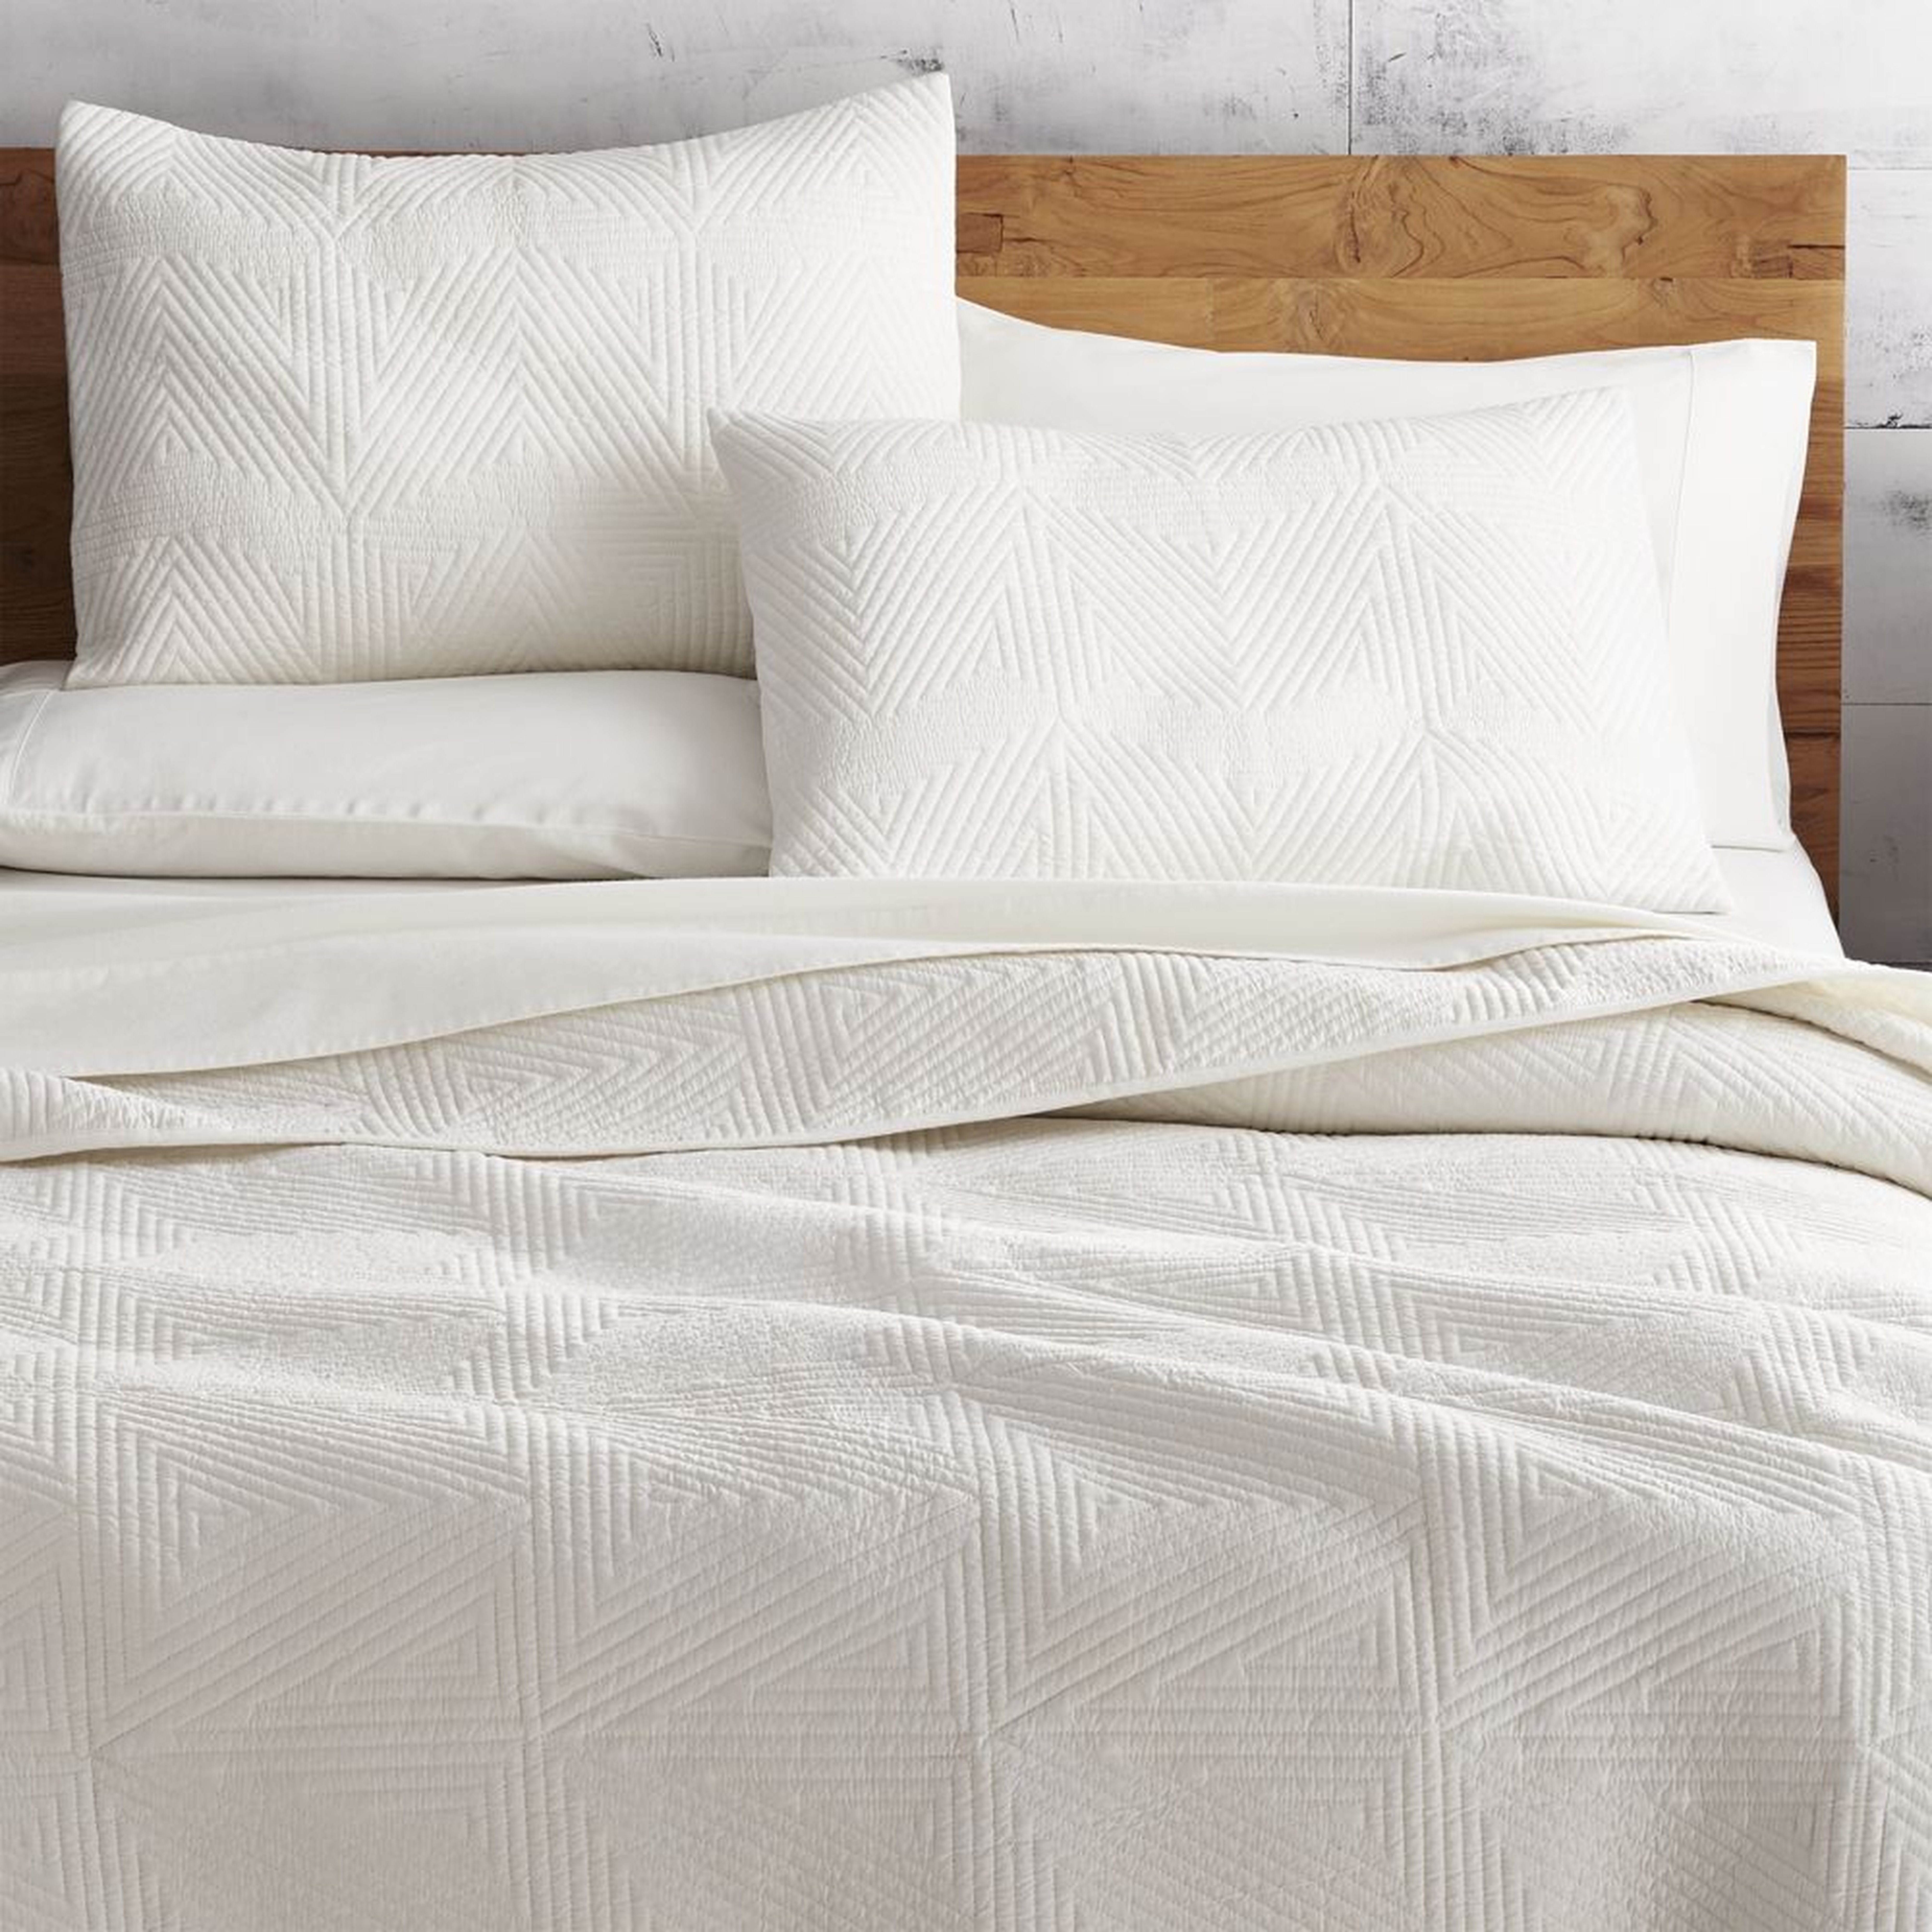 Triangle Warm White Coverlet Full/Queen - CB2